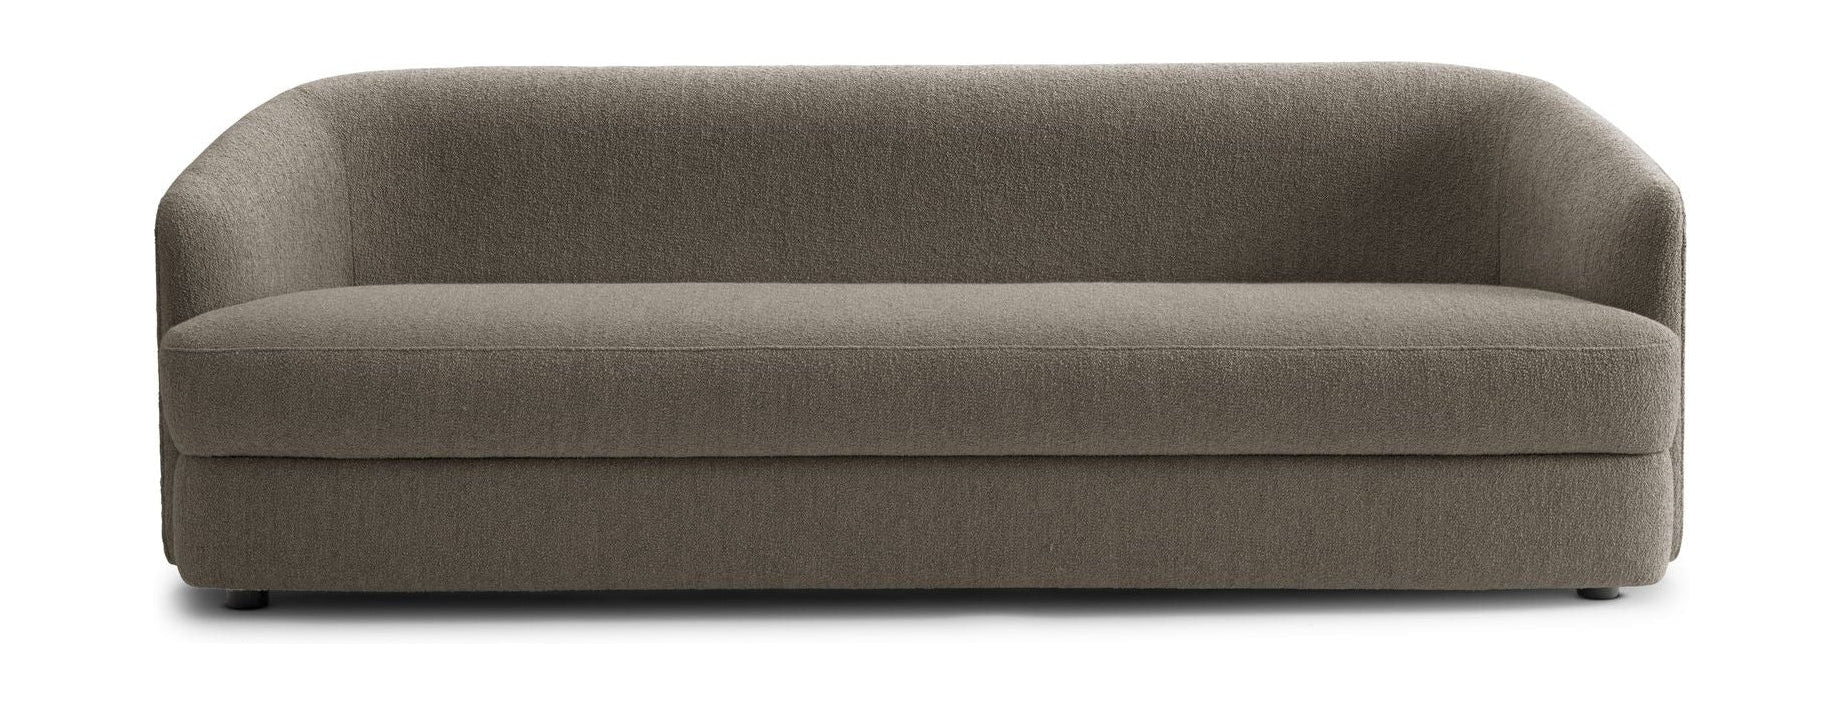 New Works Covent Sofa 3 Seater, Dark Taupe